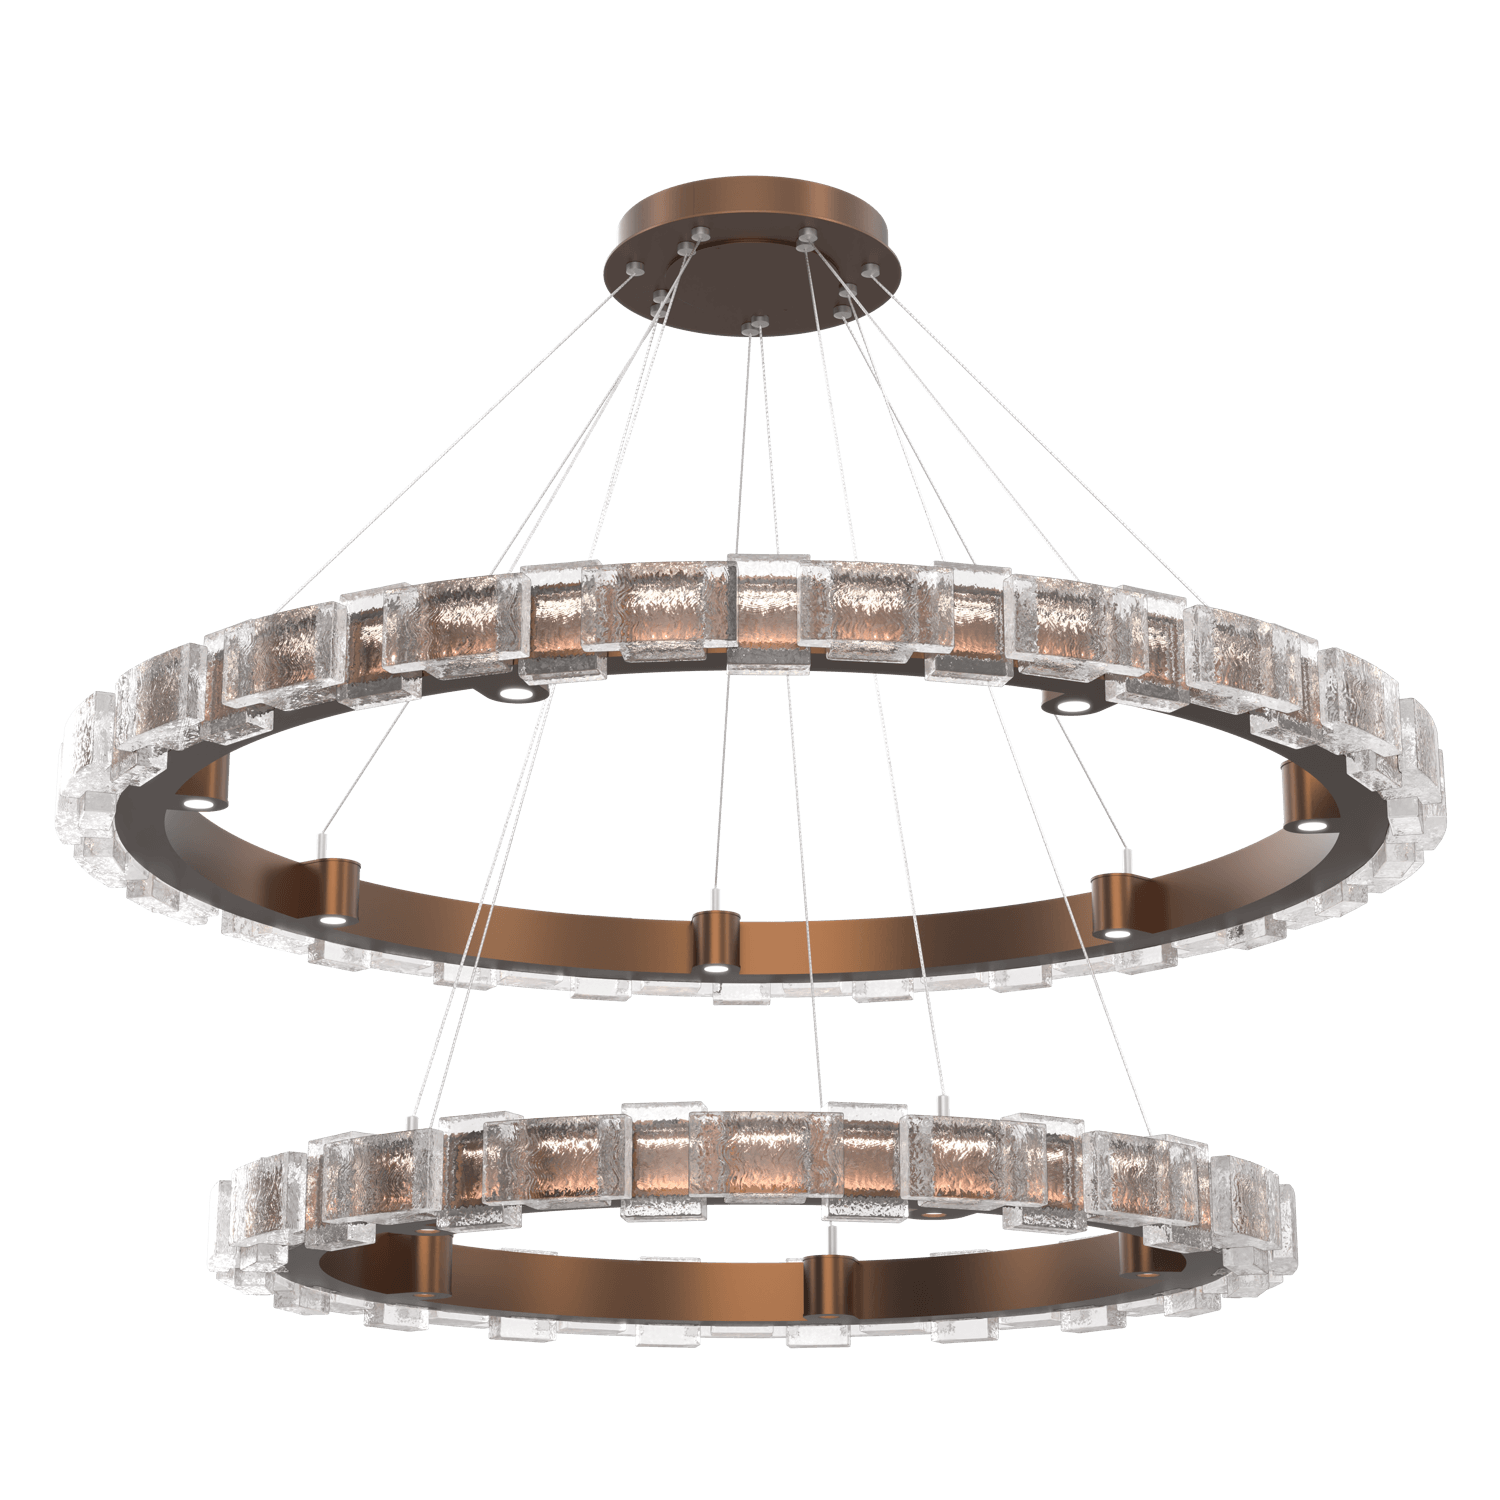 CHB0087-2T-BB-TE-Hammerton-Studio-Tessera-50-inch-two-tier-ring-chandelier-with-burnished-bronze-finish-and-clear-tetro-cast-glass-shade-and-LED-lamping